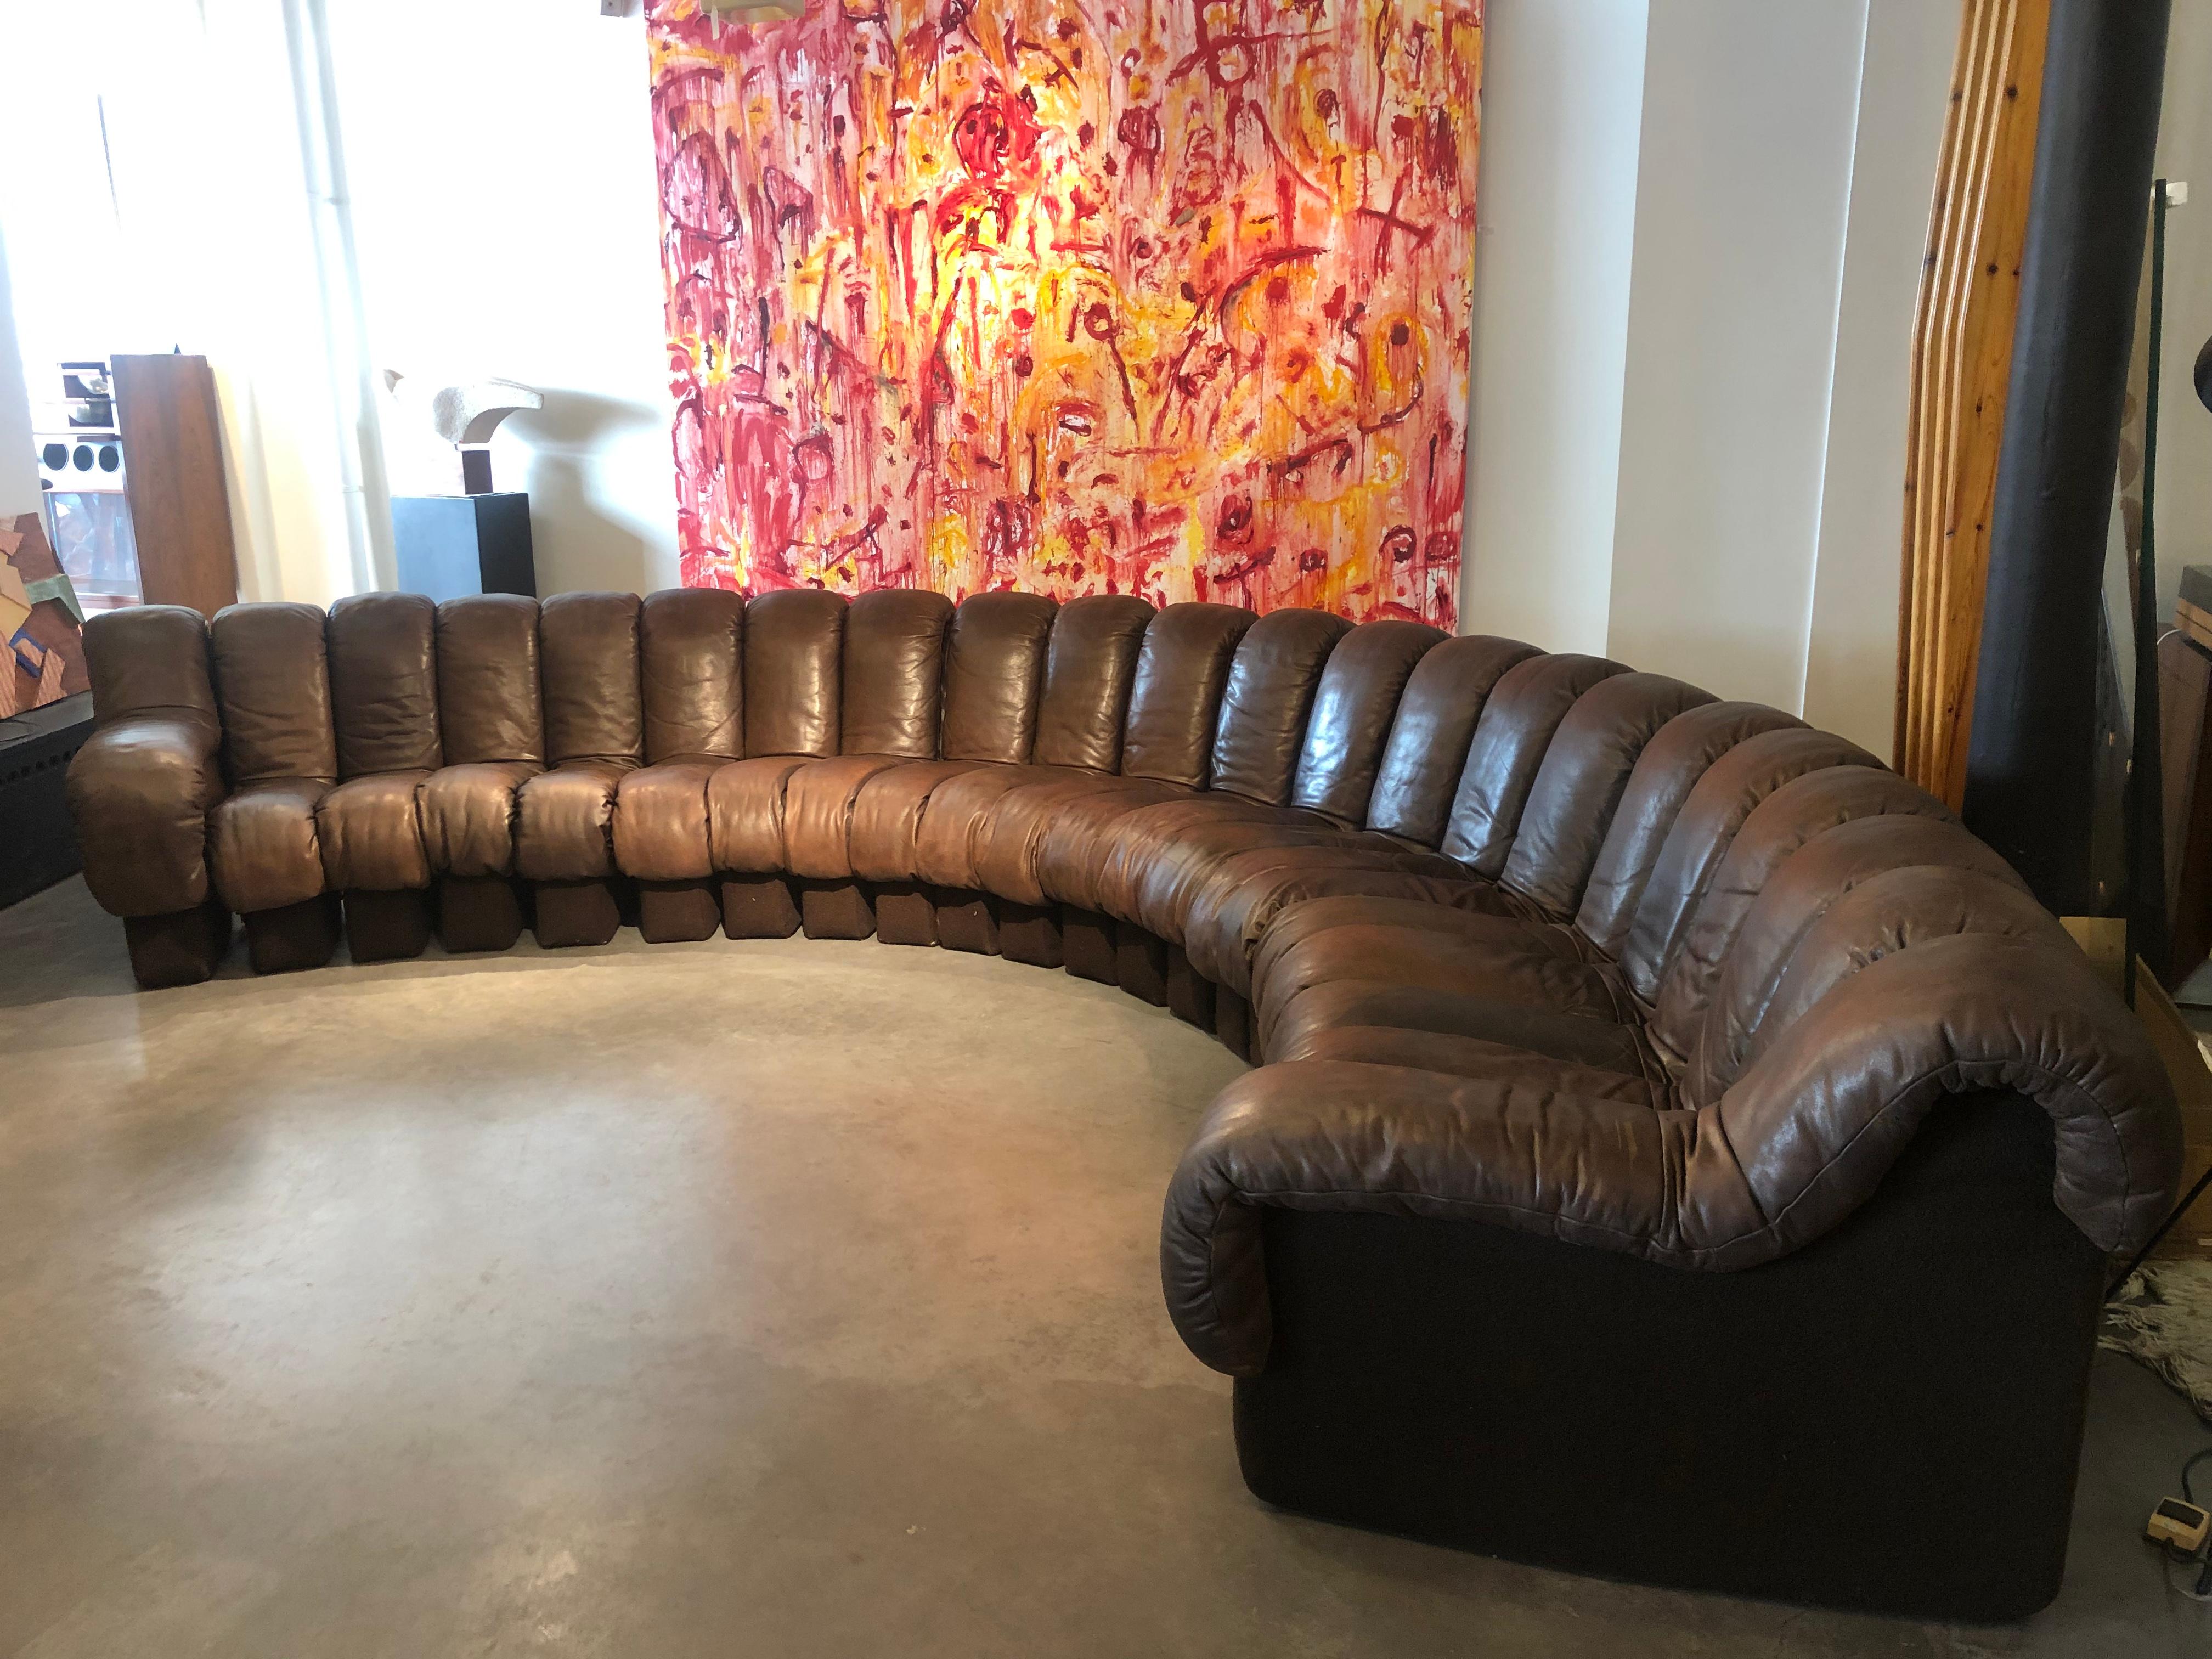 Very impressive sofa by de sede model ds 600 called « non stop sofa » with 22 elements in very good condition and with wonderful middle brown patina.